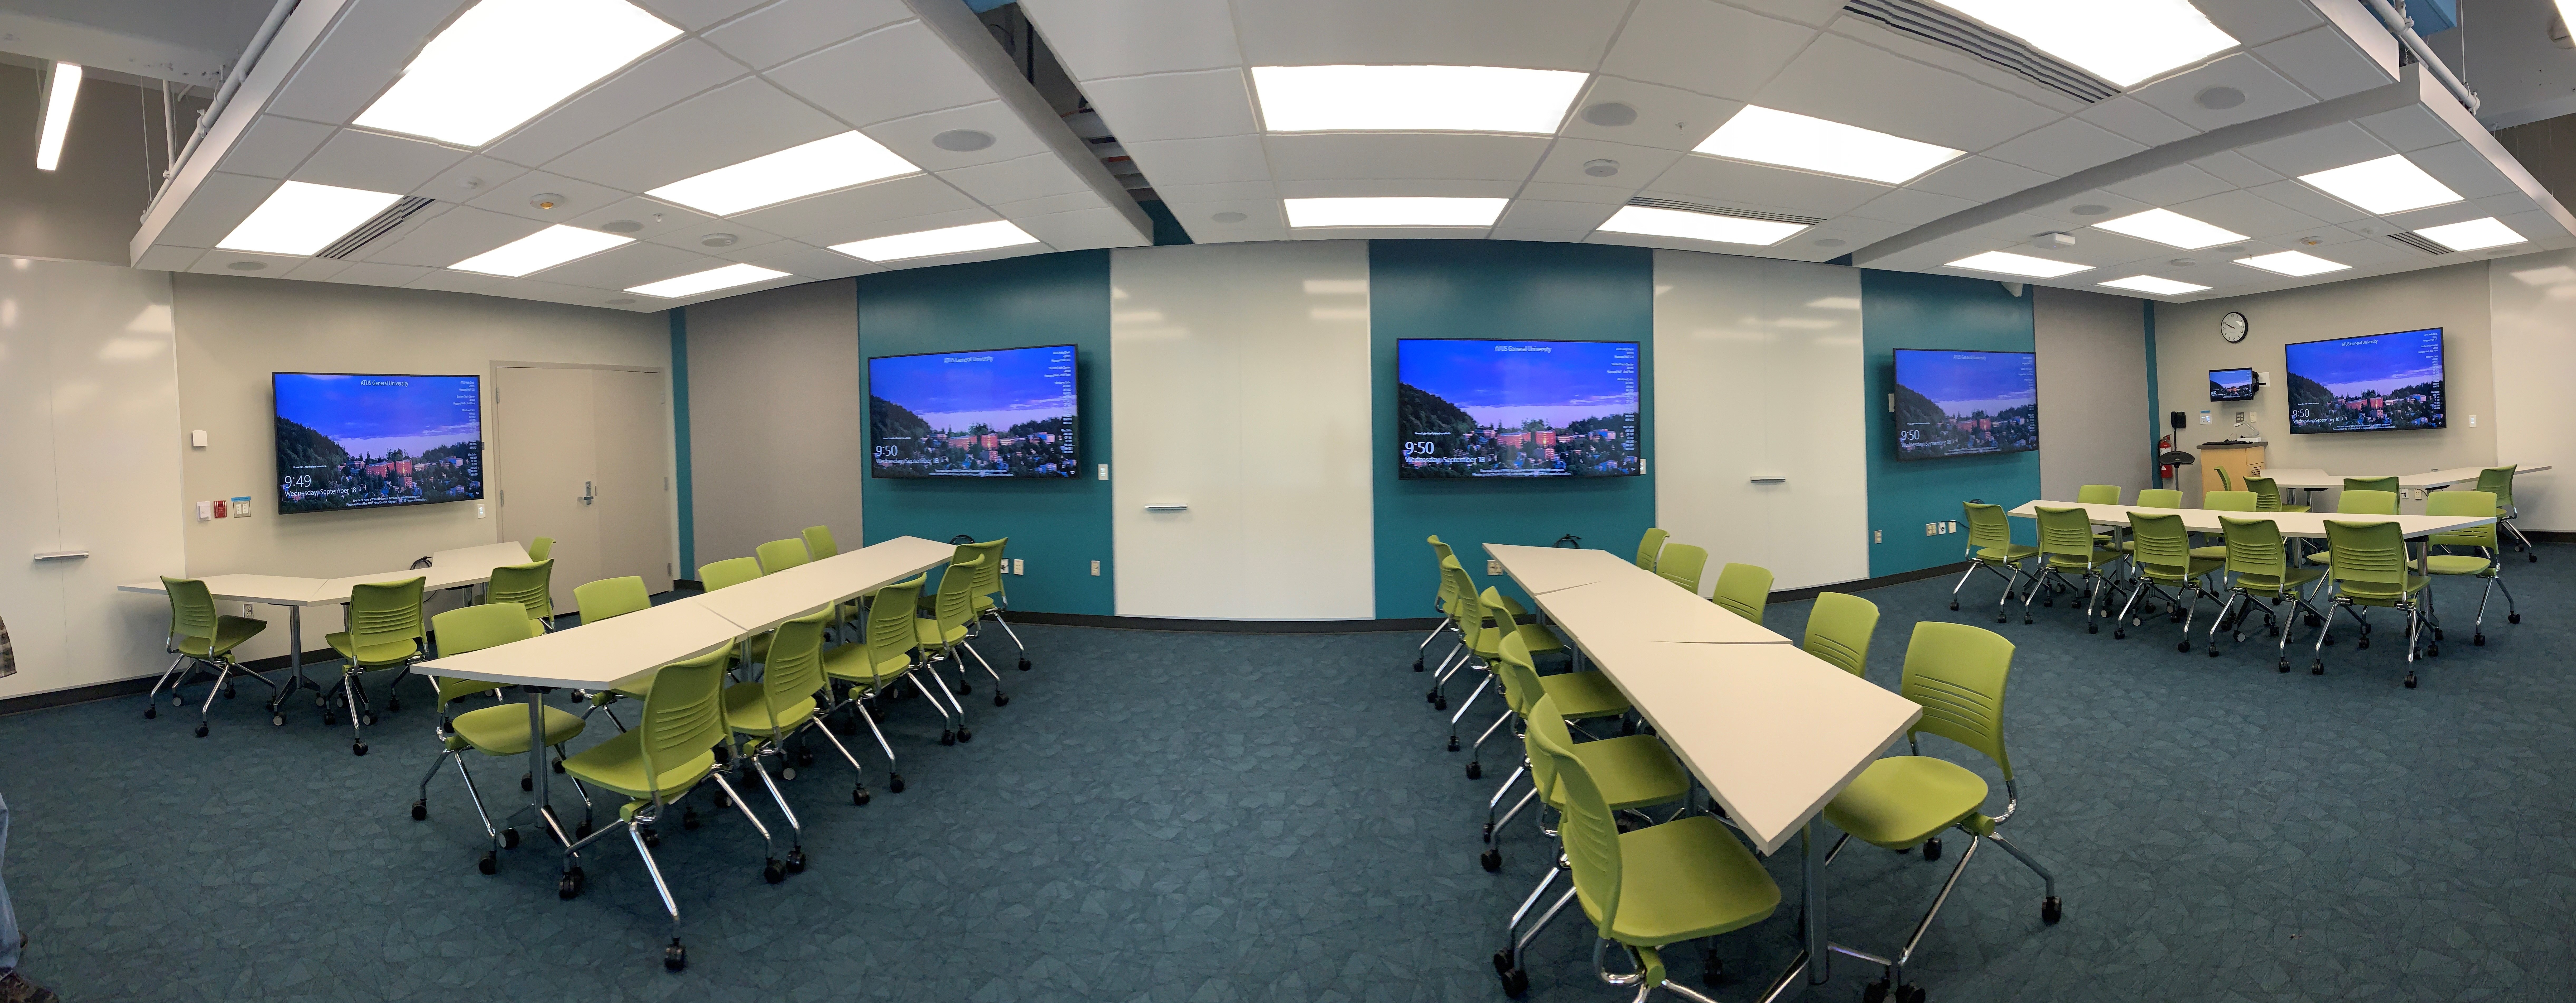 Panoramic view of the room consists of carpet floors, moveable and arrangeable tables and chairs, five TV monitors spread out around the room for different, collaborative viewing options.